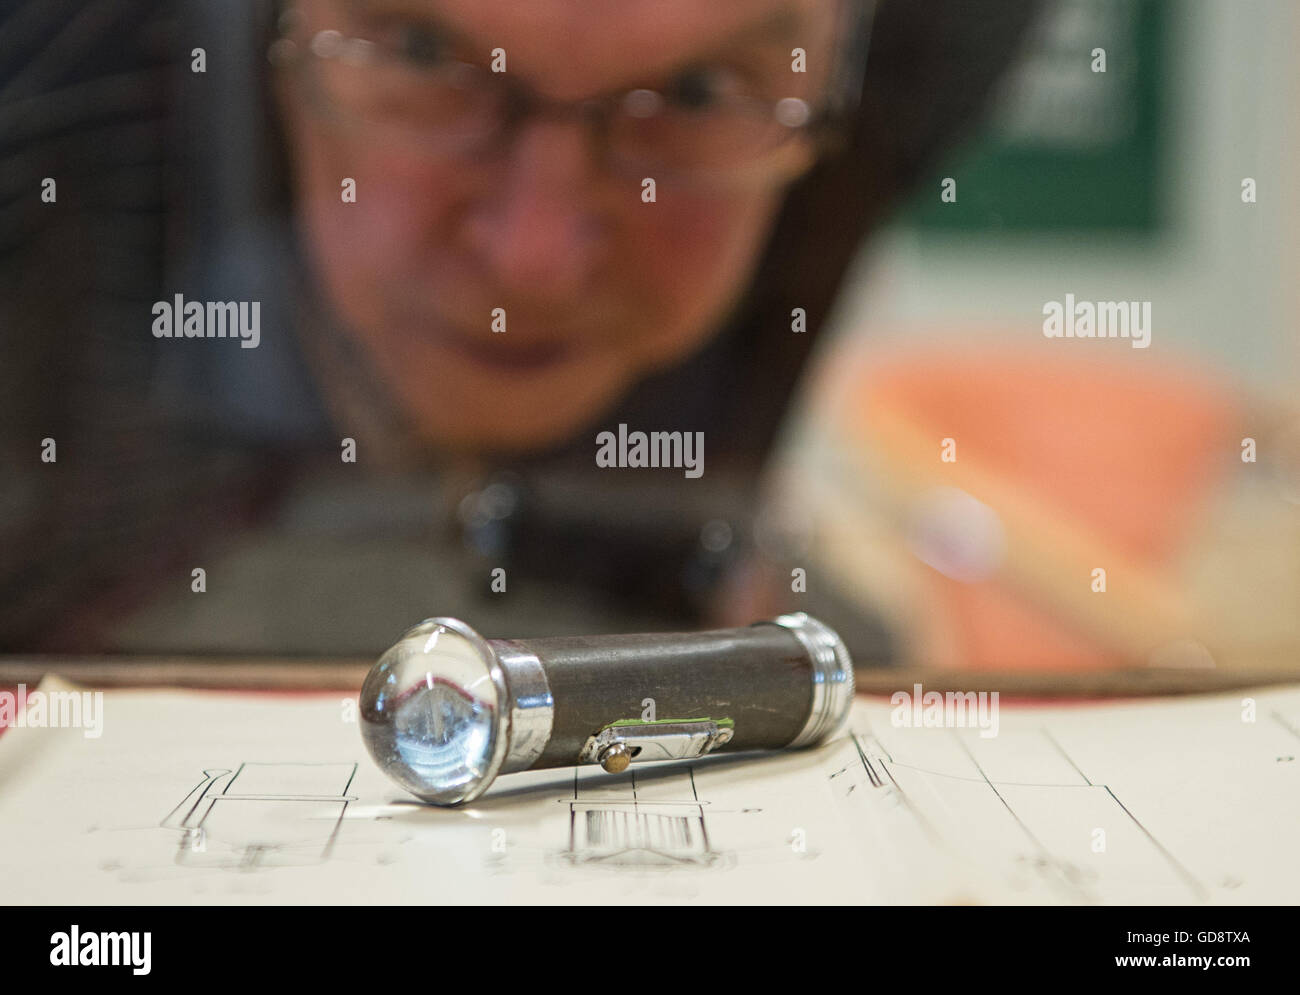 Berlin, Germany. 13th July, 2016. A visitor looks at a historical flashlight during the opening of the Daimon Museum in Berlin, Germany, 13 July 2016. The museum is dedicated to the inventor of flashlights, Paul Schmidt, who also founded the company Daimon. Photo: Wolfram Kastl/dpa/Alamy Live News Stock Photo